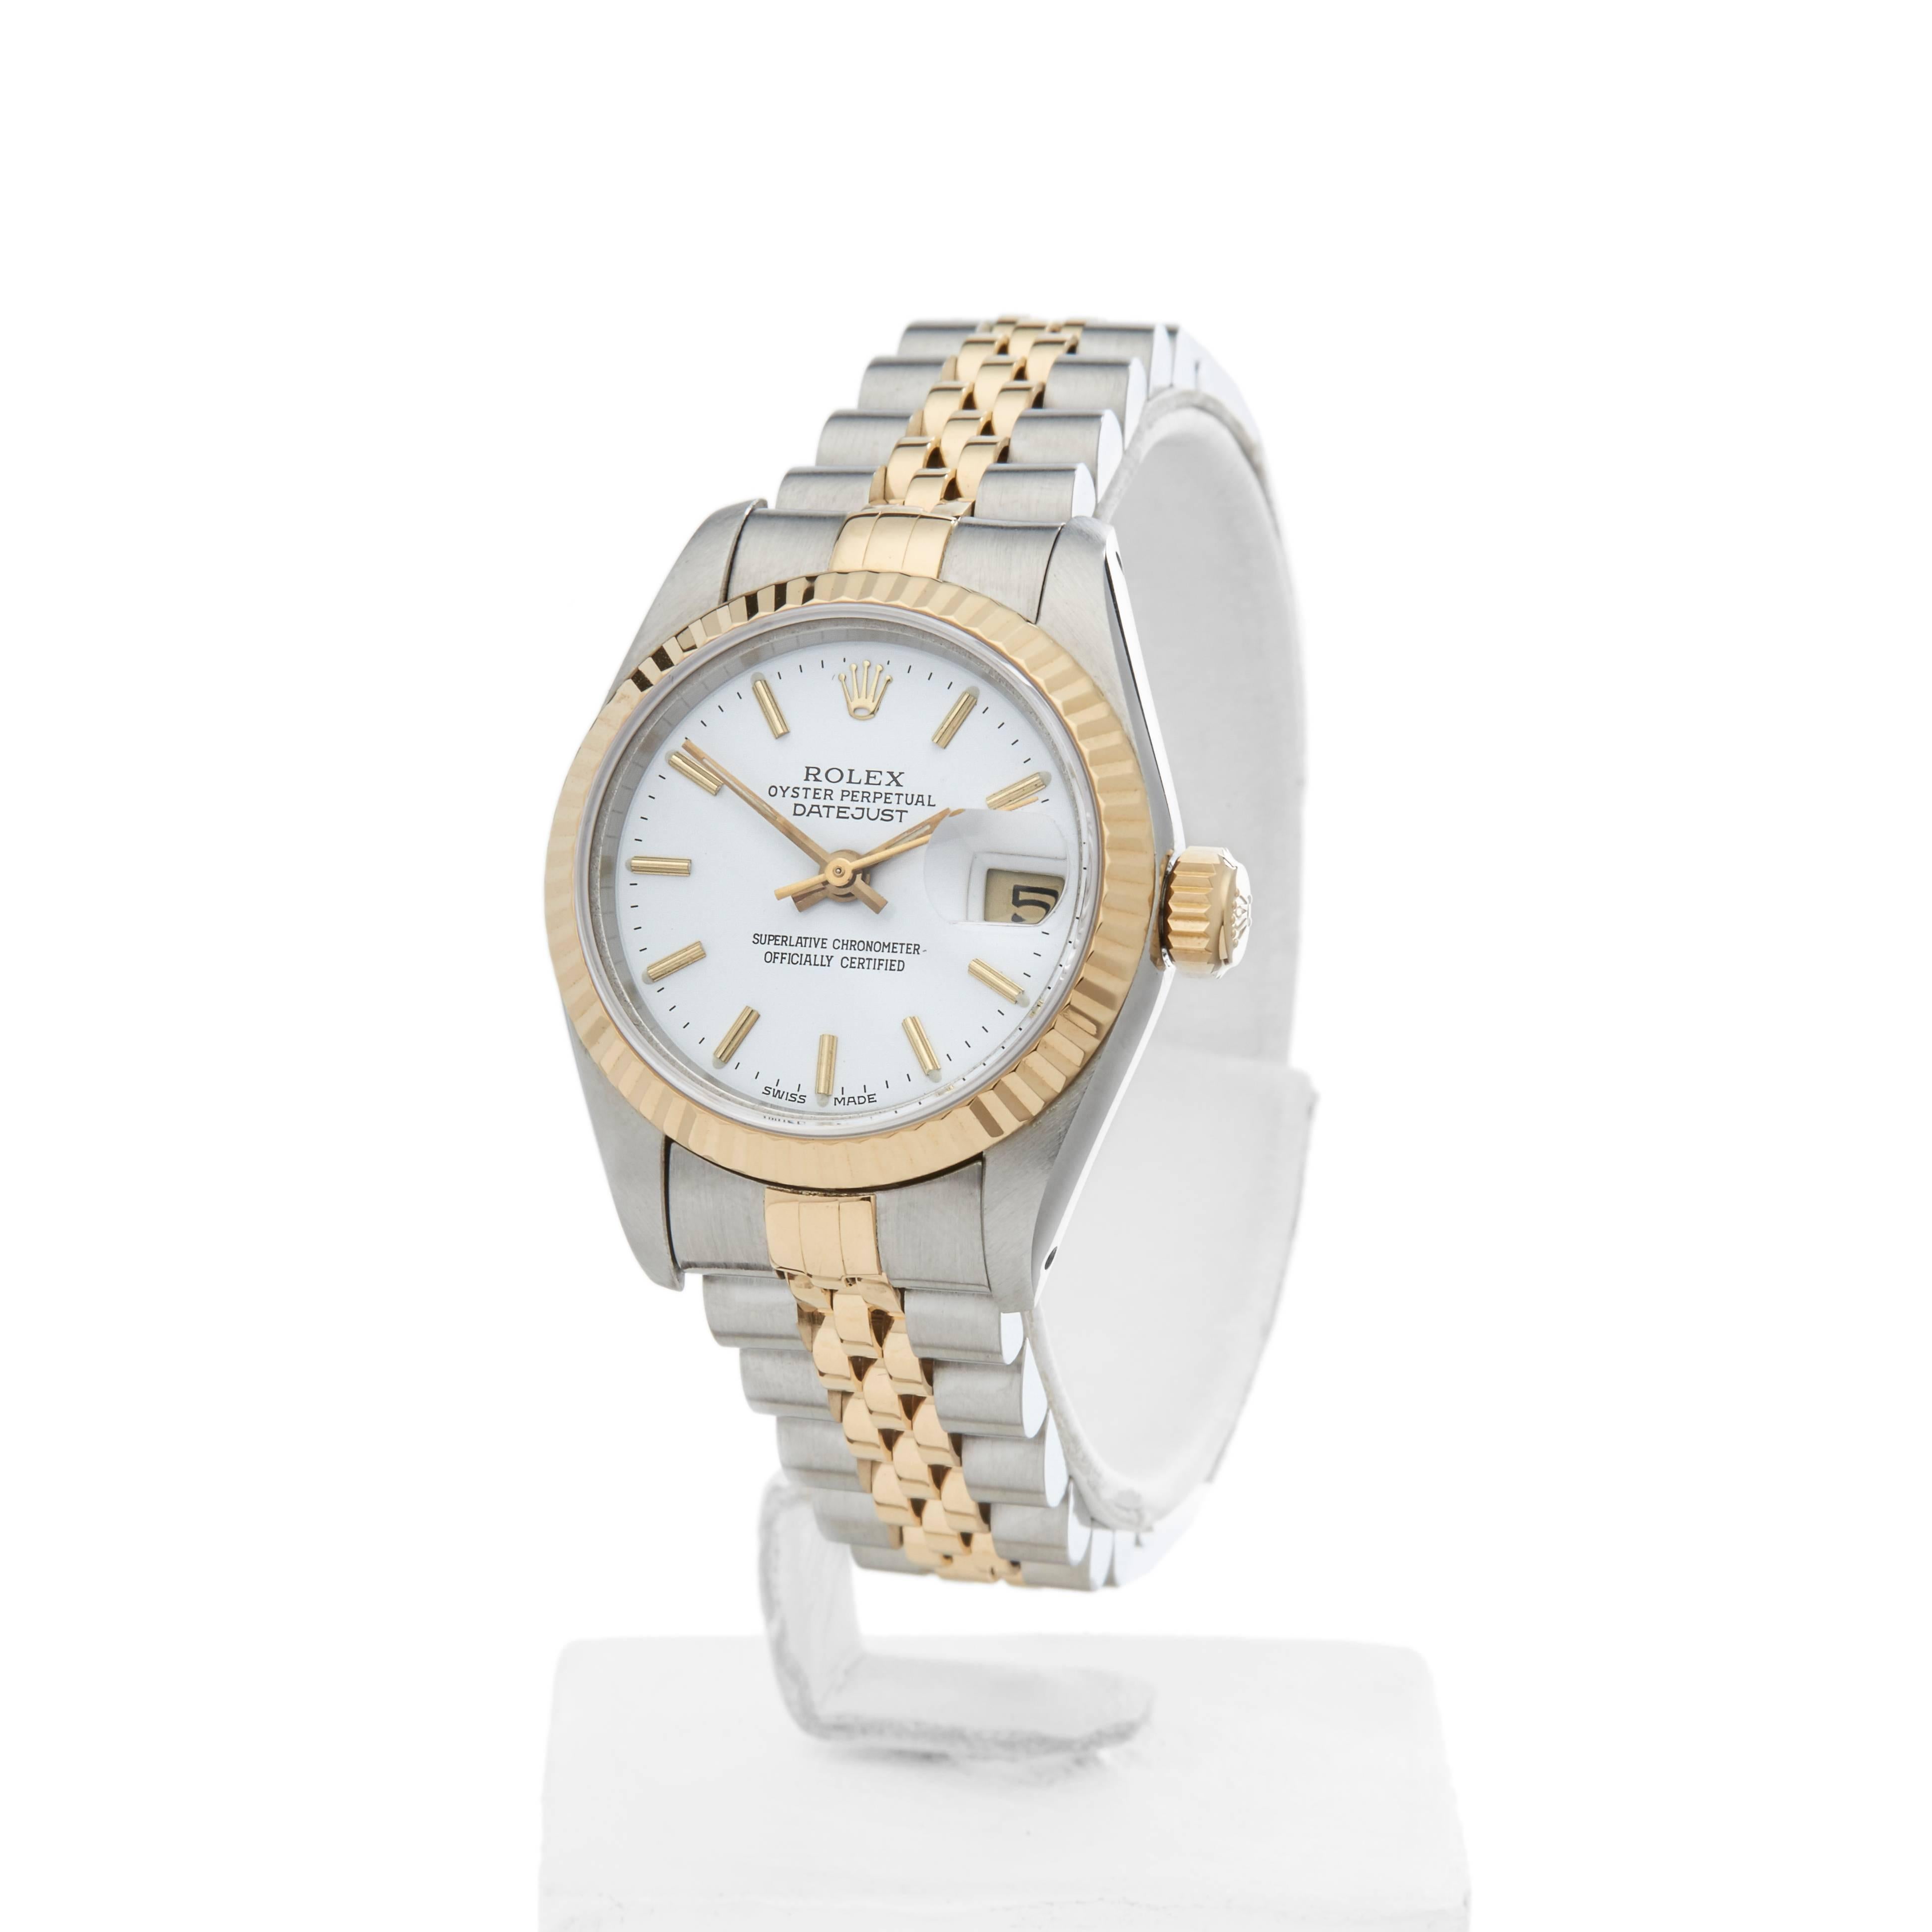 
Ref: W4259
Model Number: 69173
Serial Number: X22****
Condition: 9 - Excellent Condition
Gender: Ladies
Age: 1st June 1992
Case Size: 26mm
Box and Papers: Box and Guarantee
Movement: Automatic
Case: Stainless Steel and 18k Yellow Gold
Dial: White